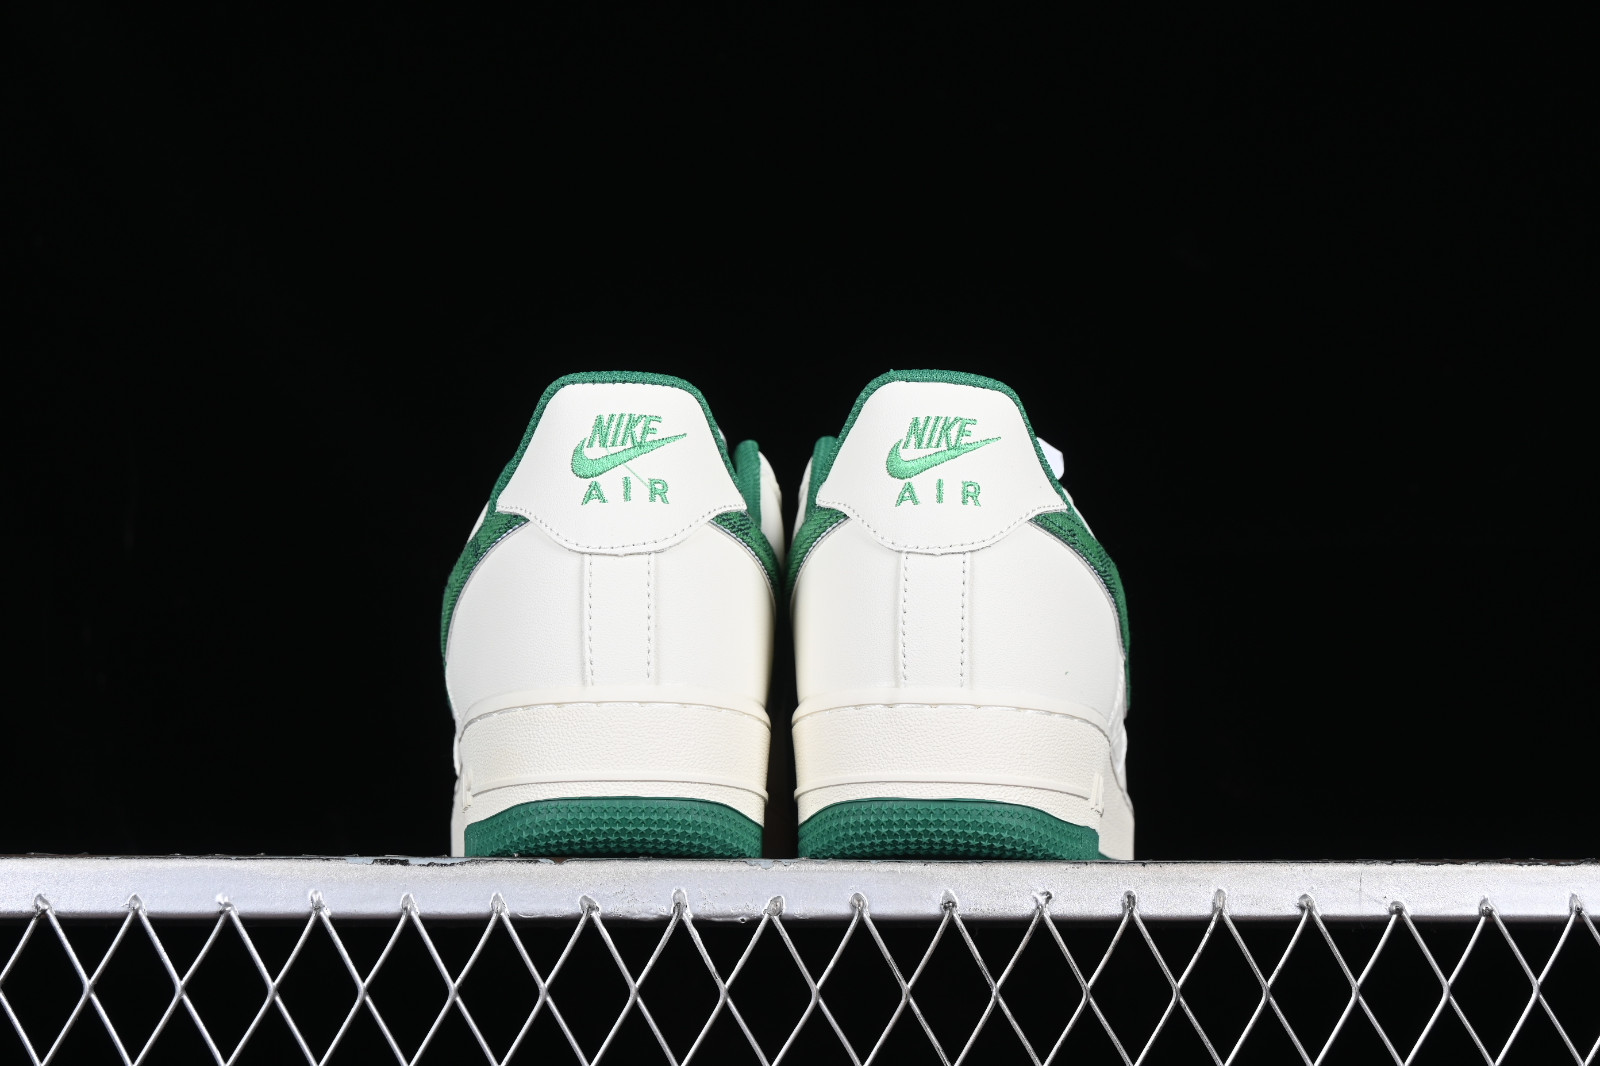 MultiscaleconsultingShops - Nike Air Force 1 07 Low LV White Green LV0506 -  033 - nike air force 1 low powder blue